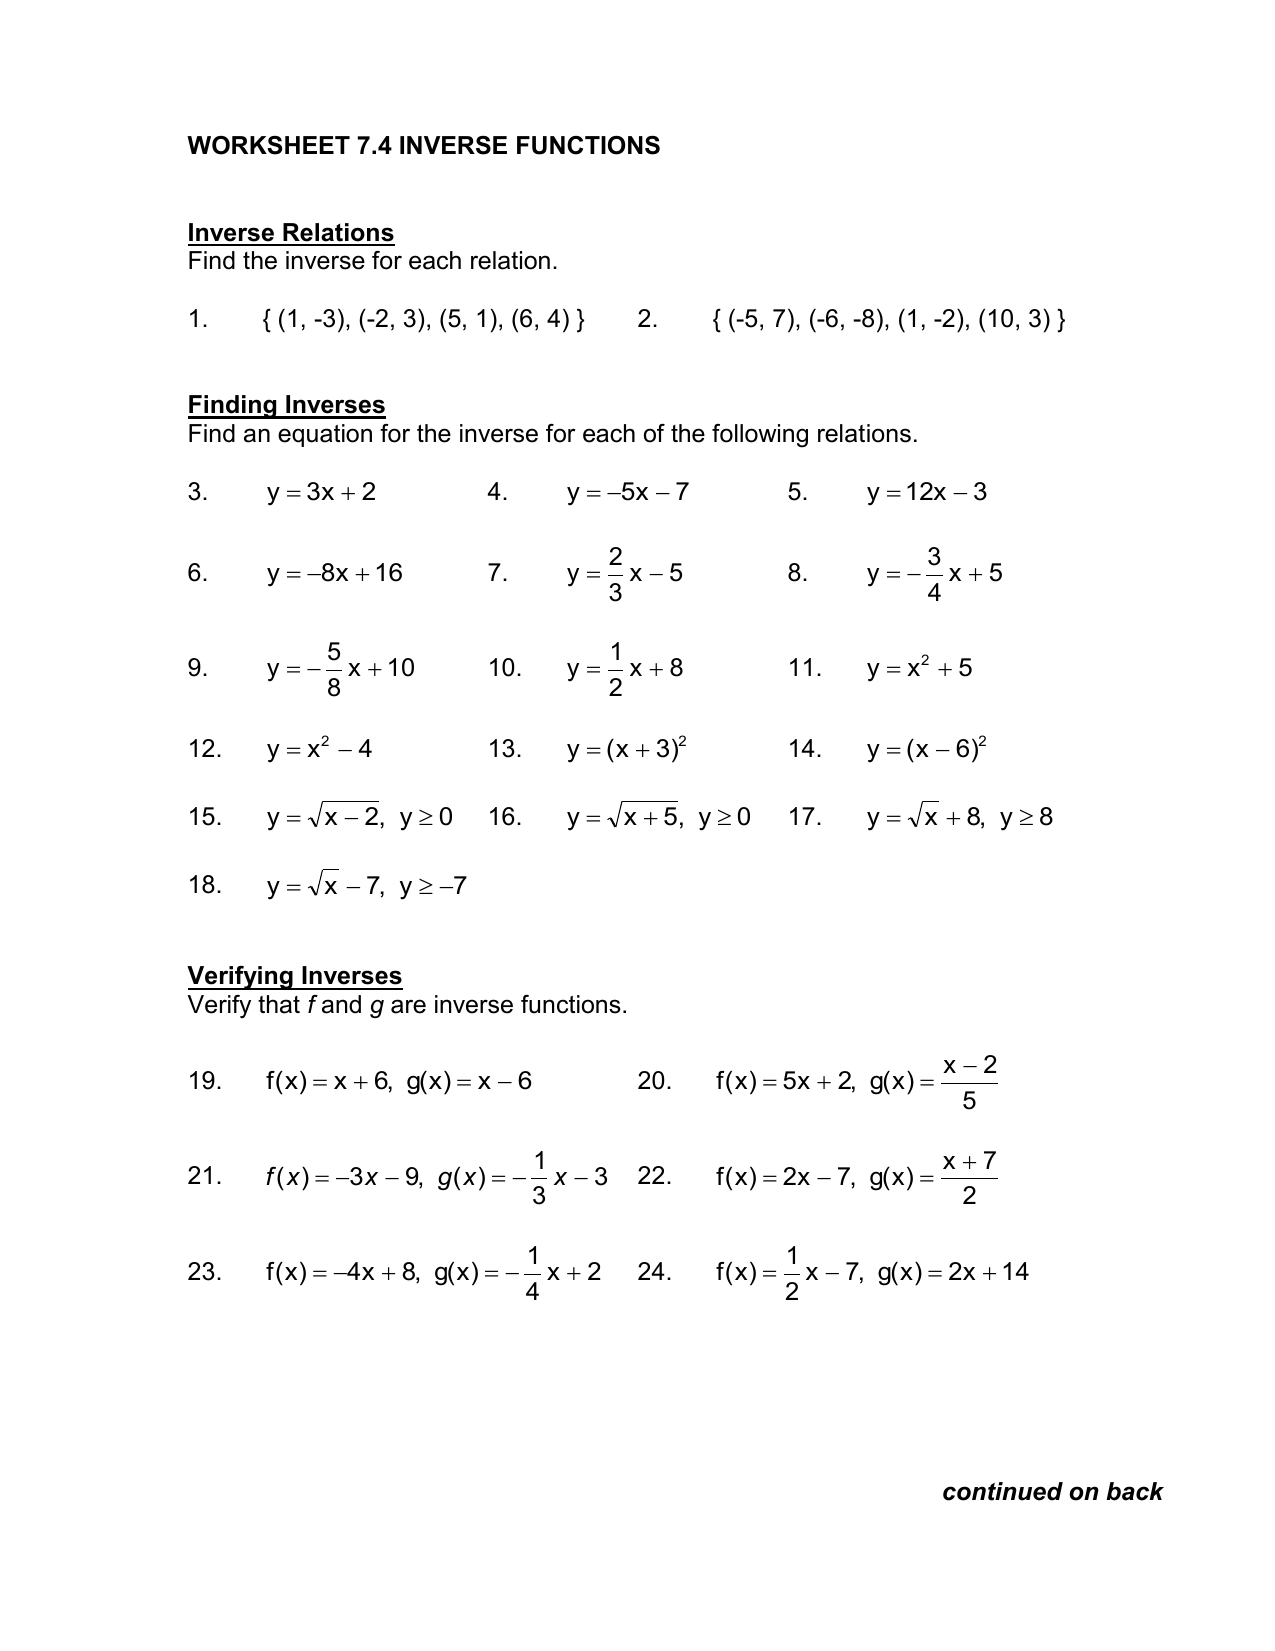 worksheet 20 20 inverse functions Inside Inverse Functions Worksheet With Answers